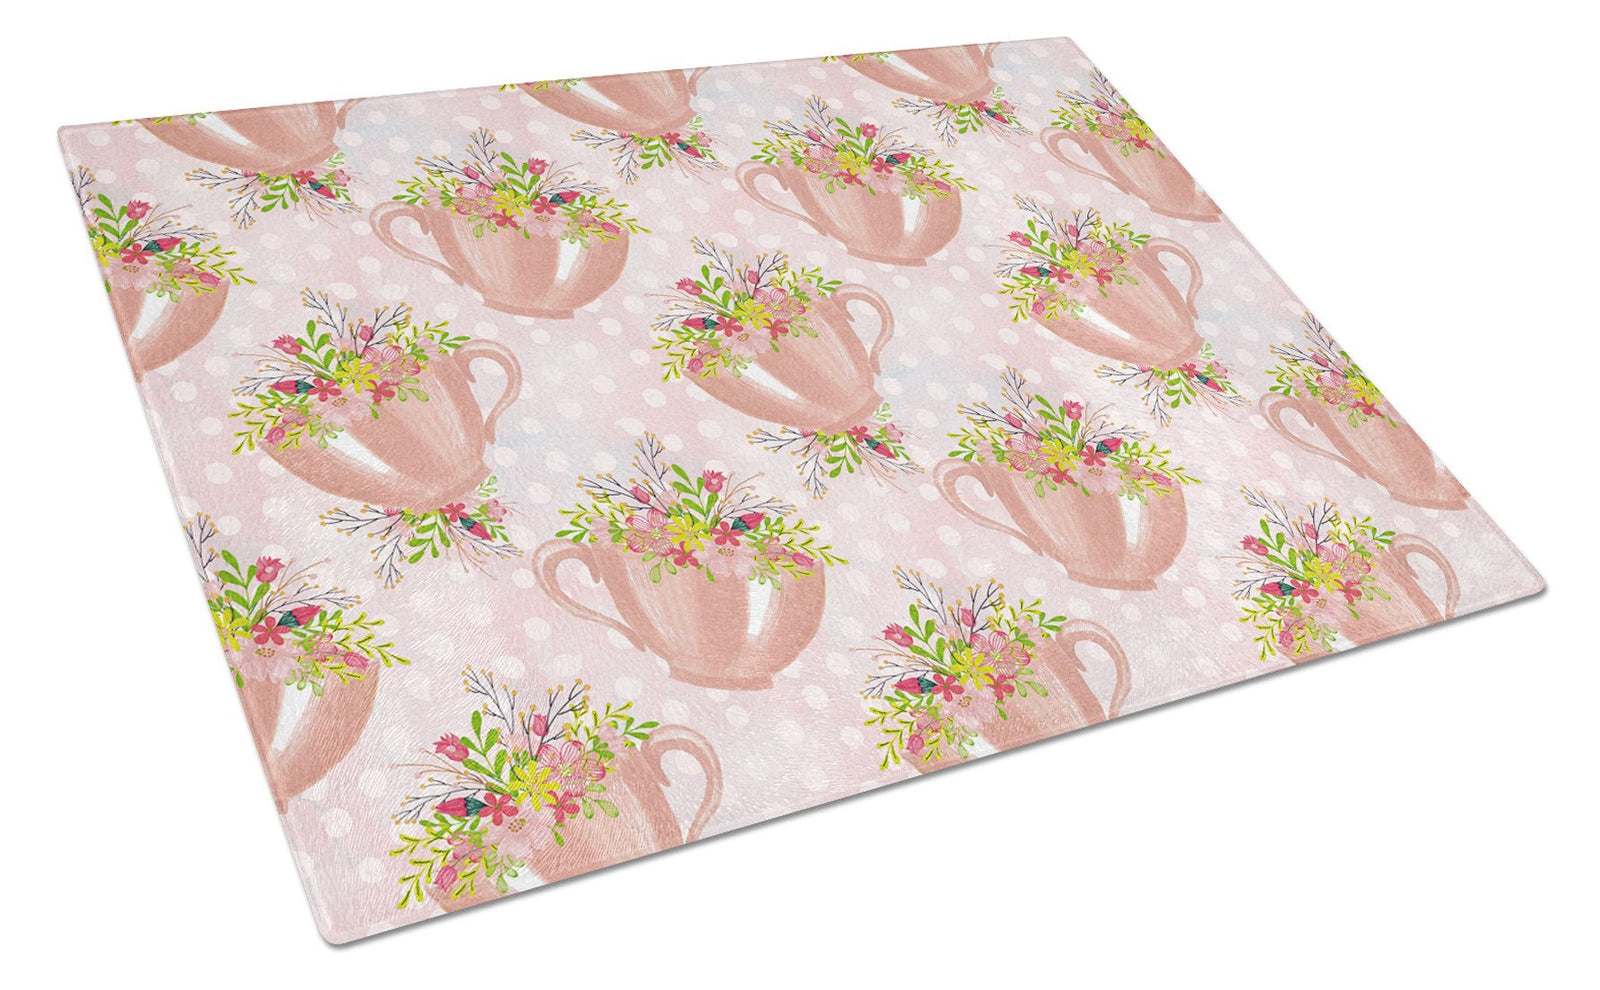 Tea Cup and Flowers Pink Glass Cutting Board Large BB7481LCB by Caroline's Treasures